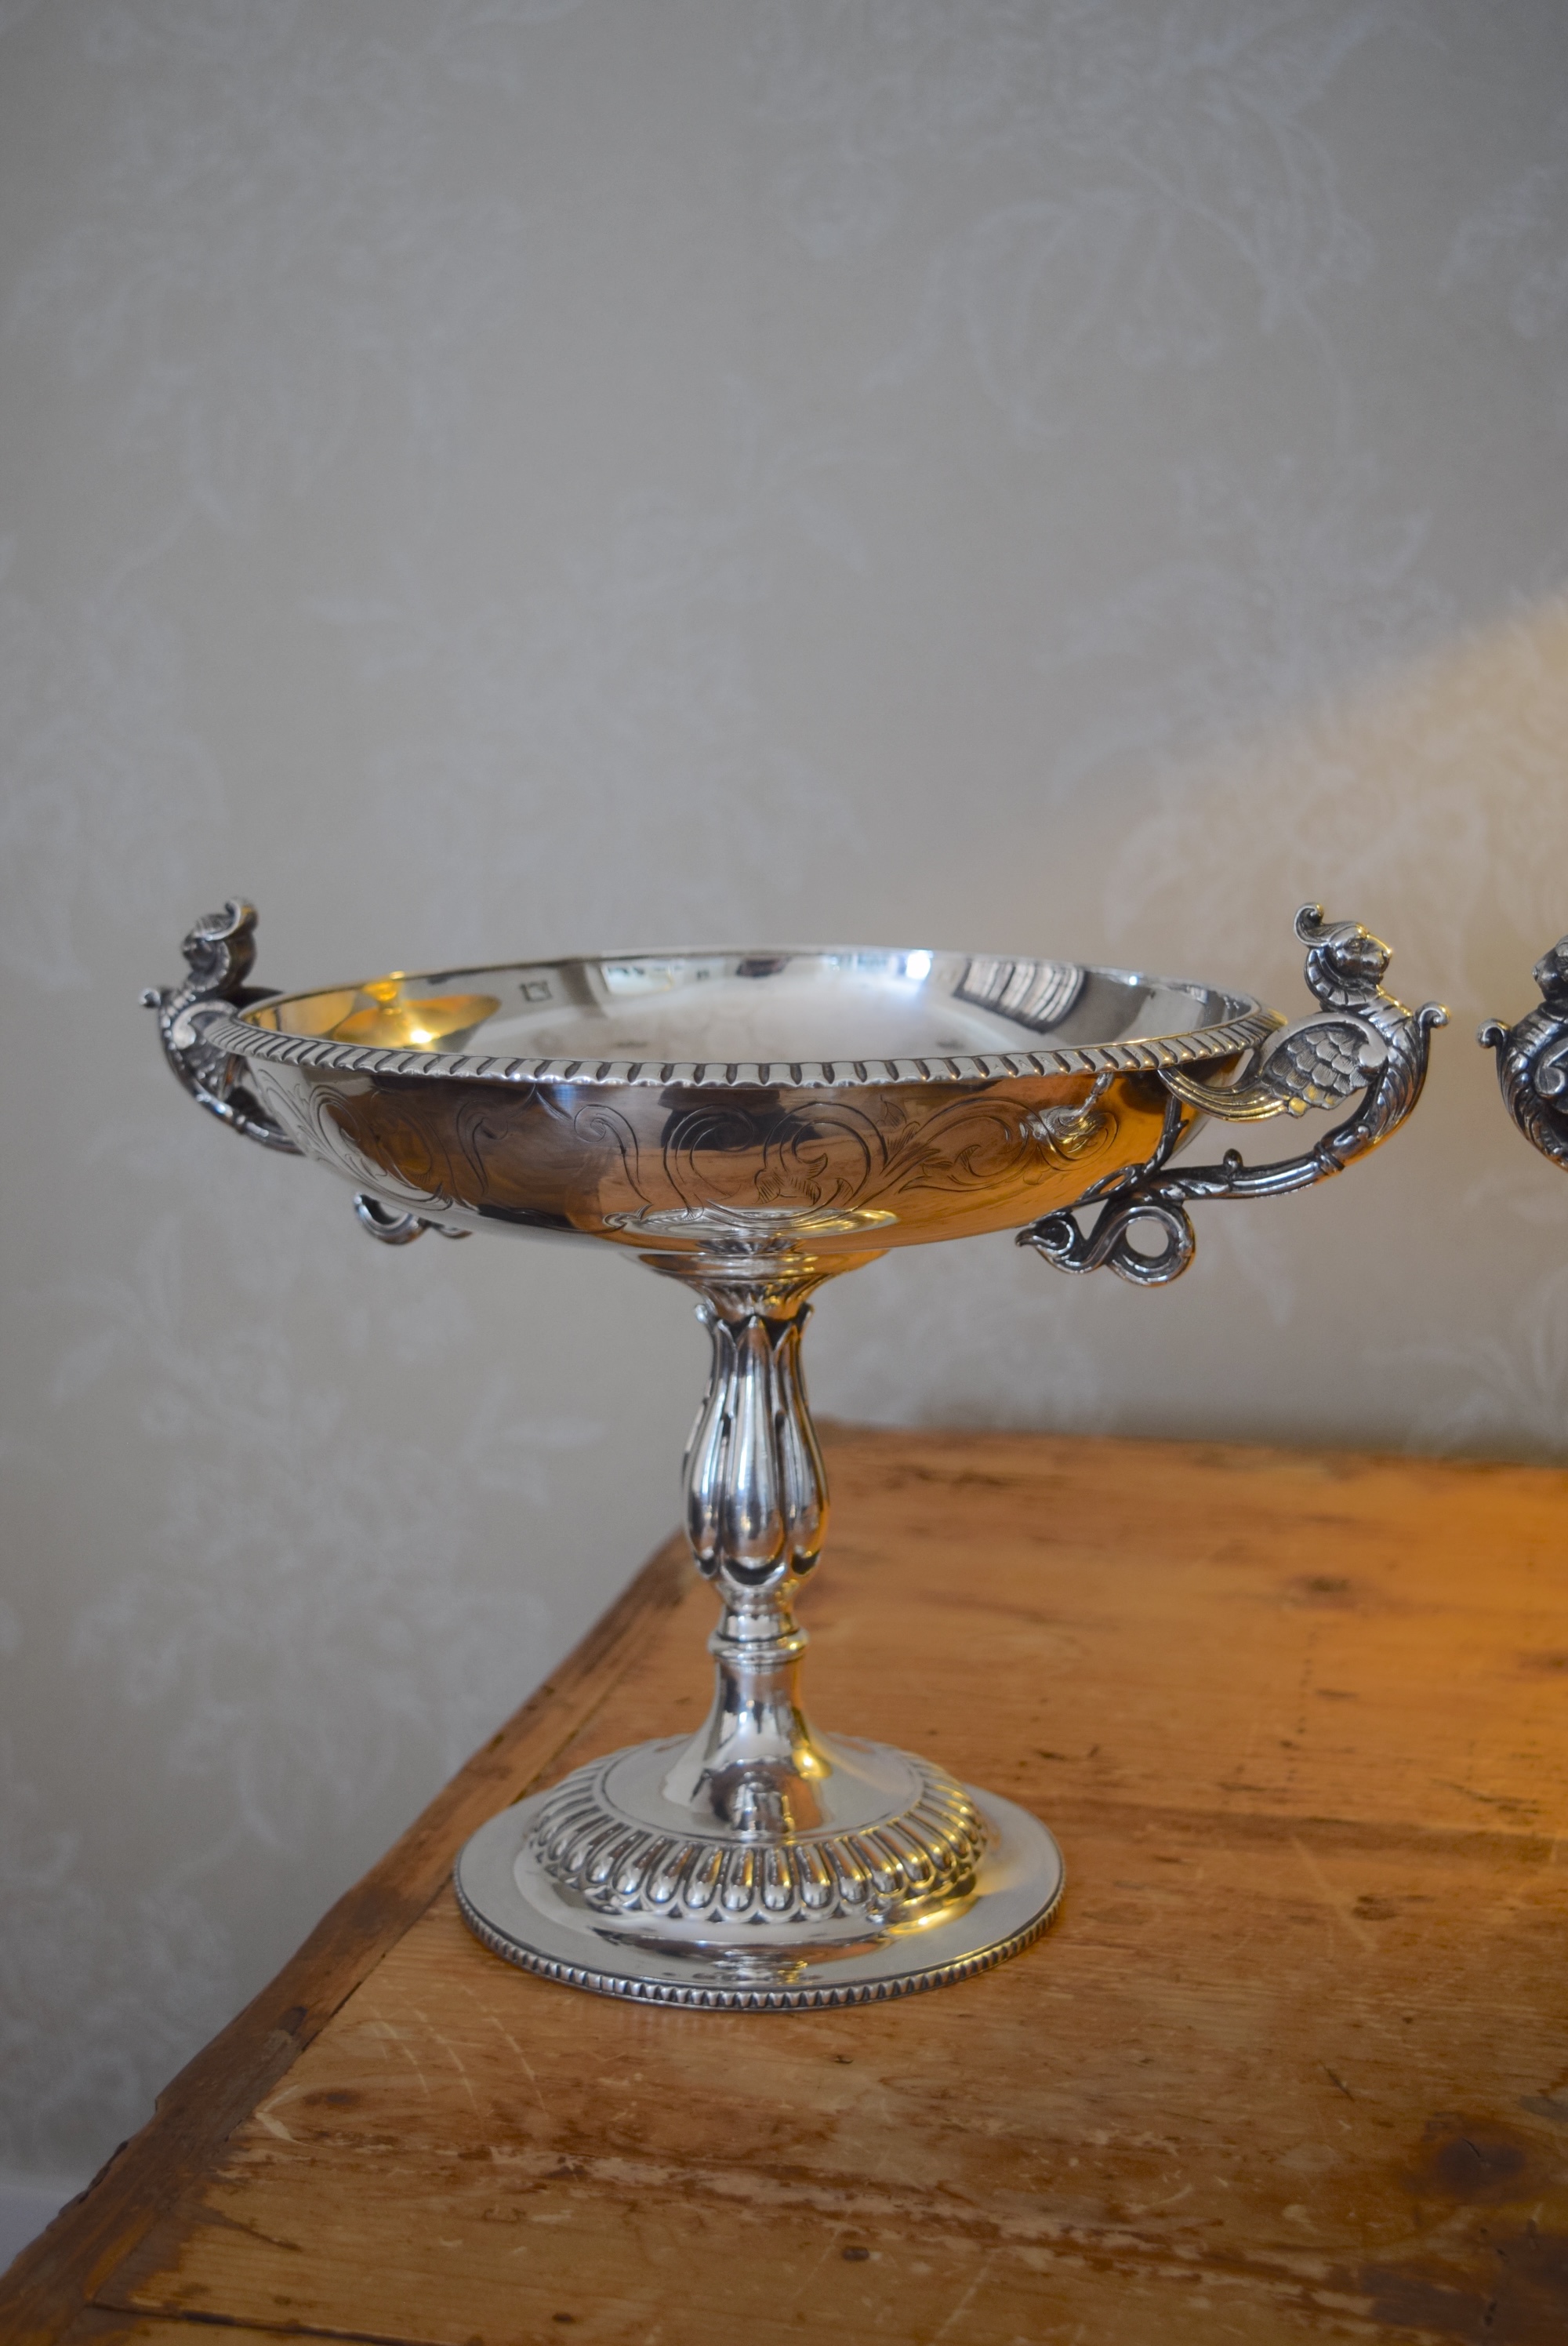 BEAUTIFUL VICTORIAN SILVER TAZZAS LARGE SIZE - APPROX. 850G (GRAMS) EACH - 95% PURE SILVER (AG) - Image 4 of 9